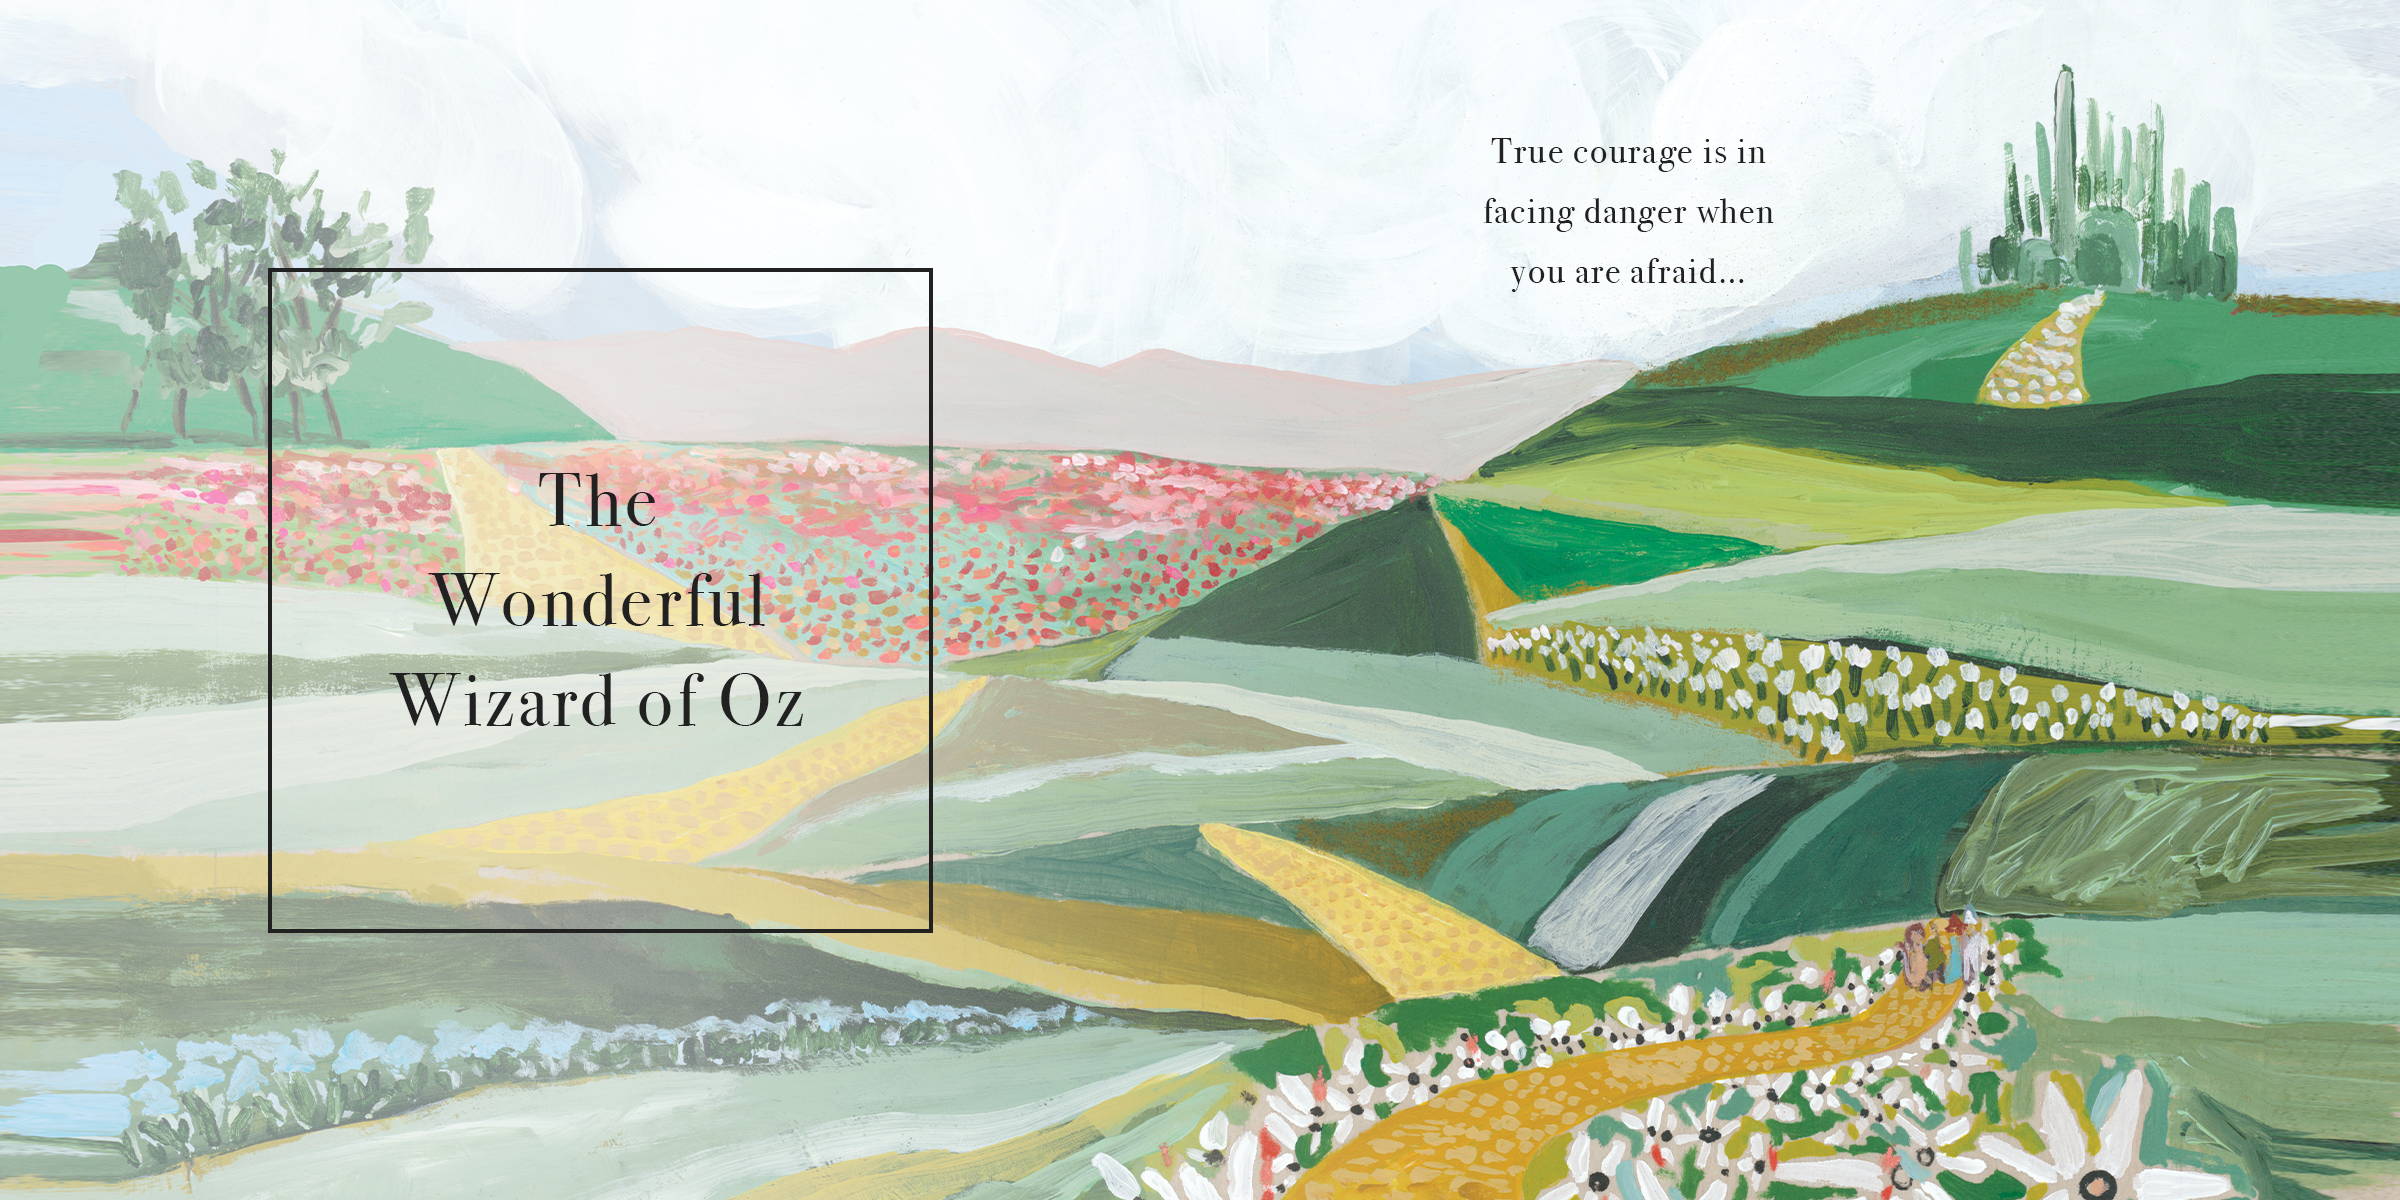 The Wonderful Wizard of Oz (Pretty Books - Painted Editions) - True courage is in facing danger when you are afraid